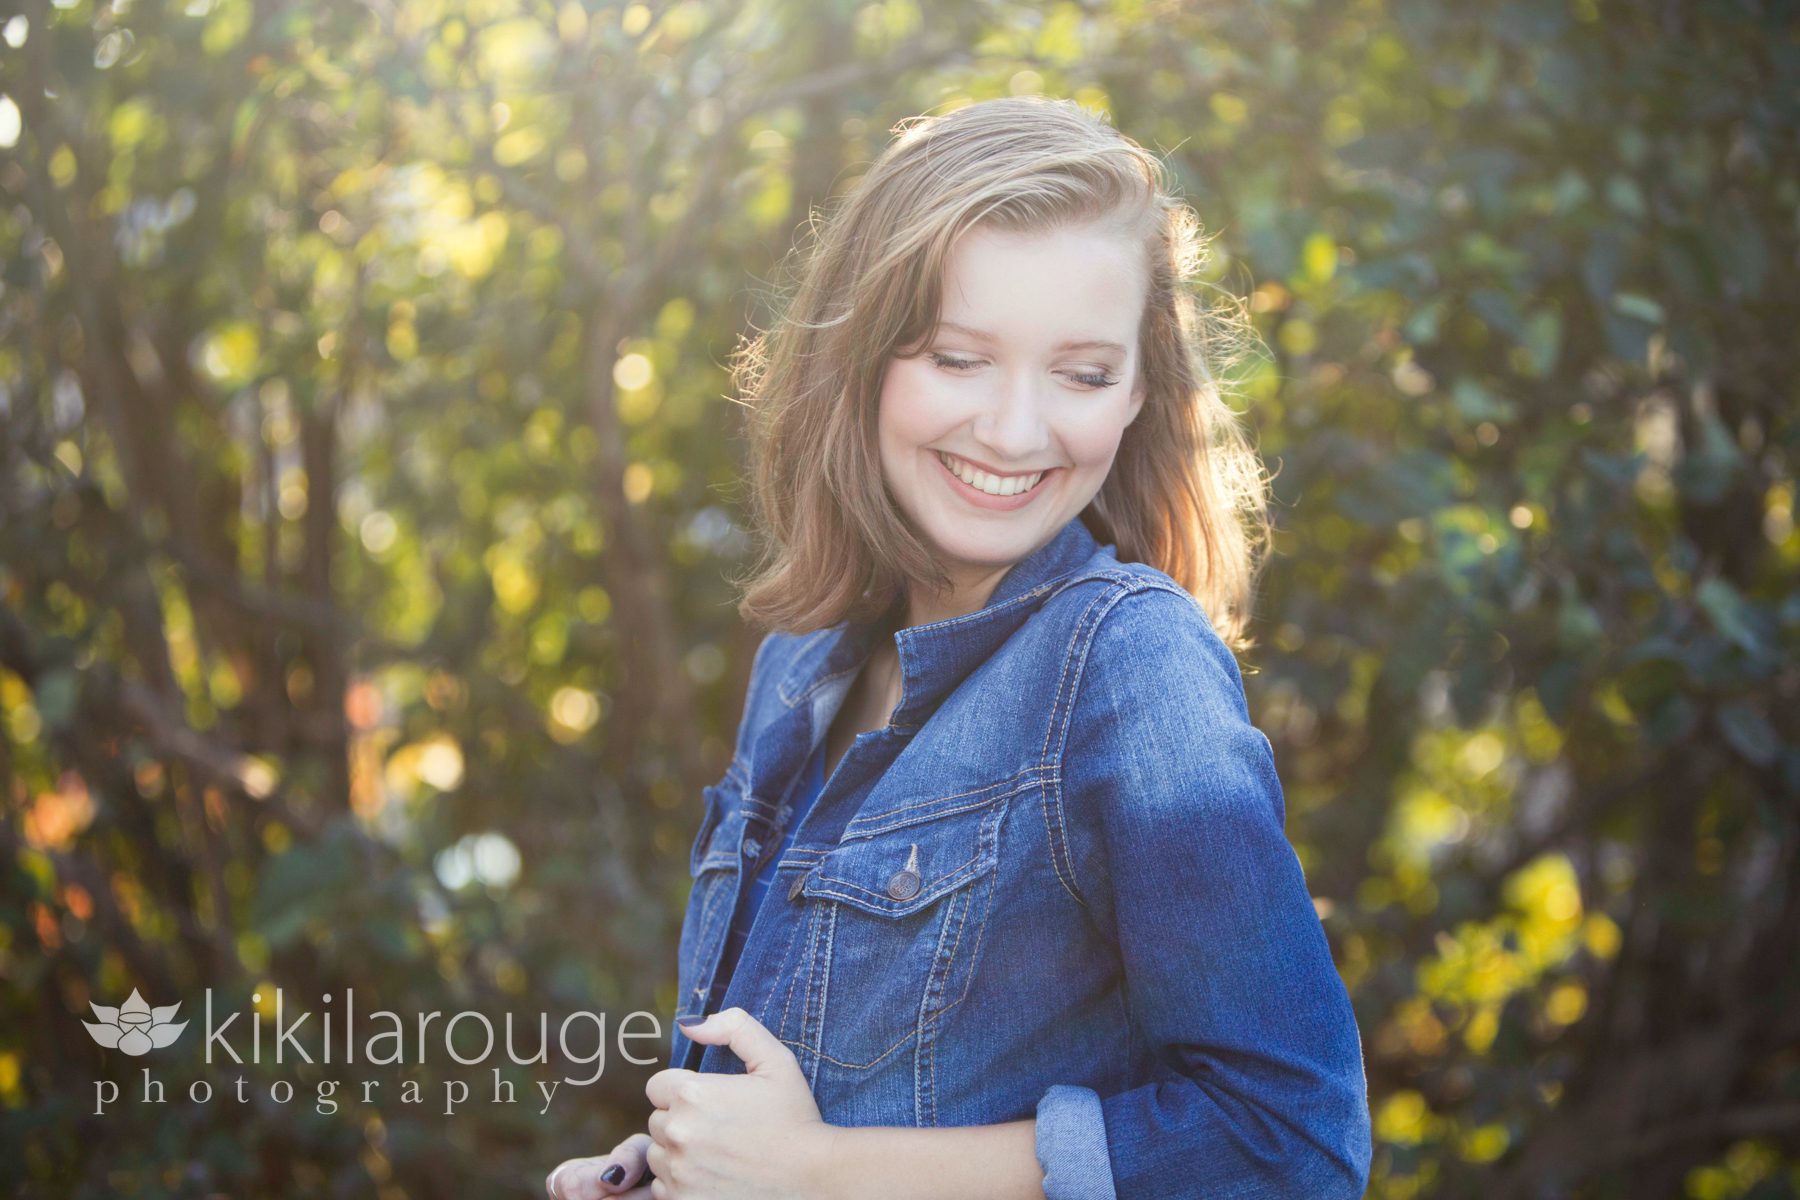 Senior Portrait in Dungaree jacket with sun flare